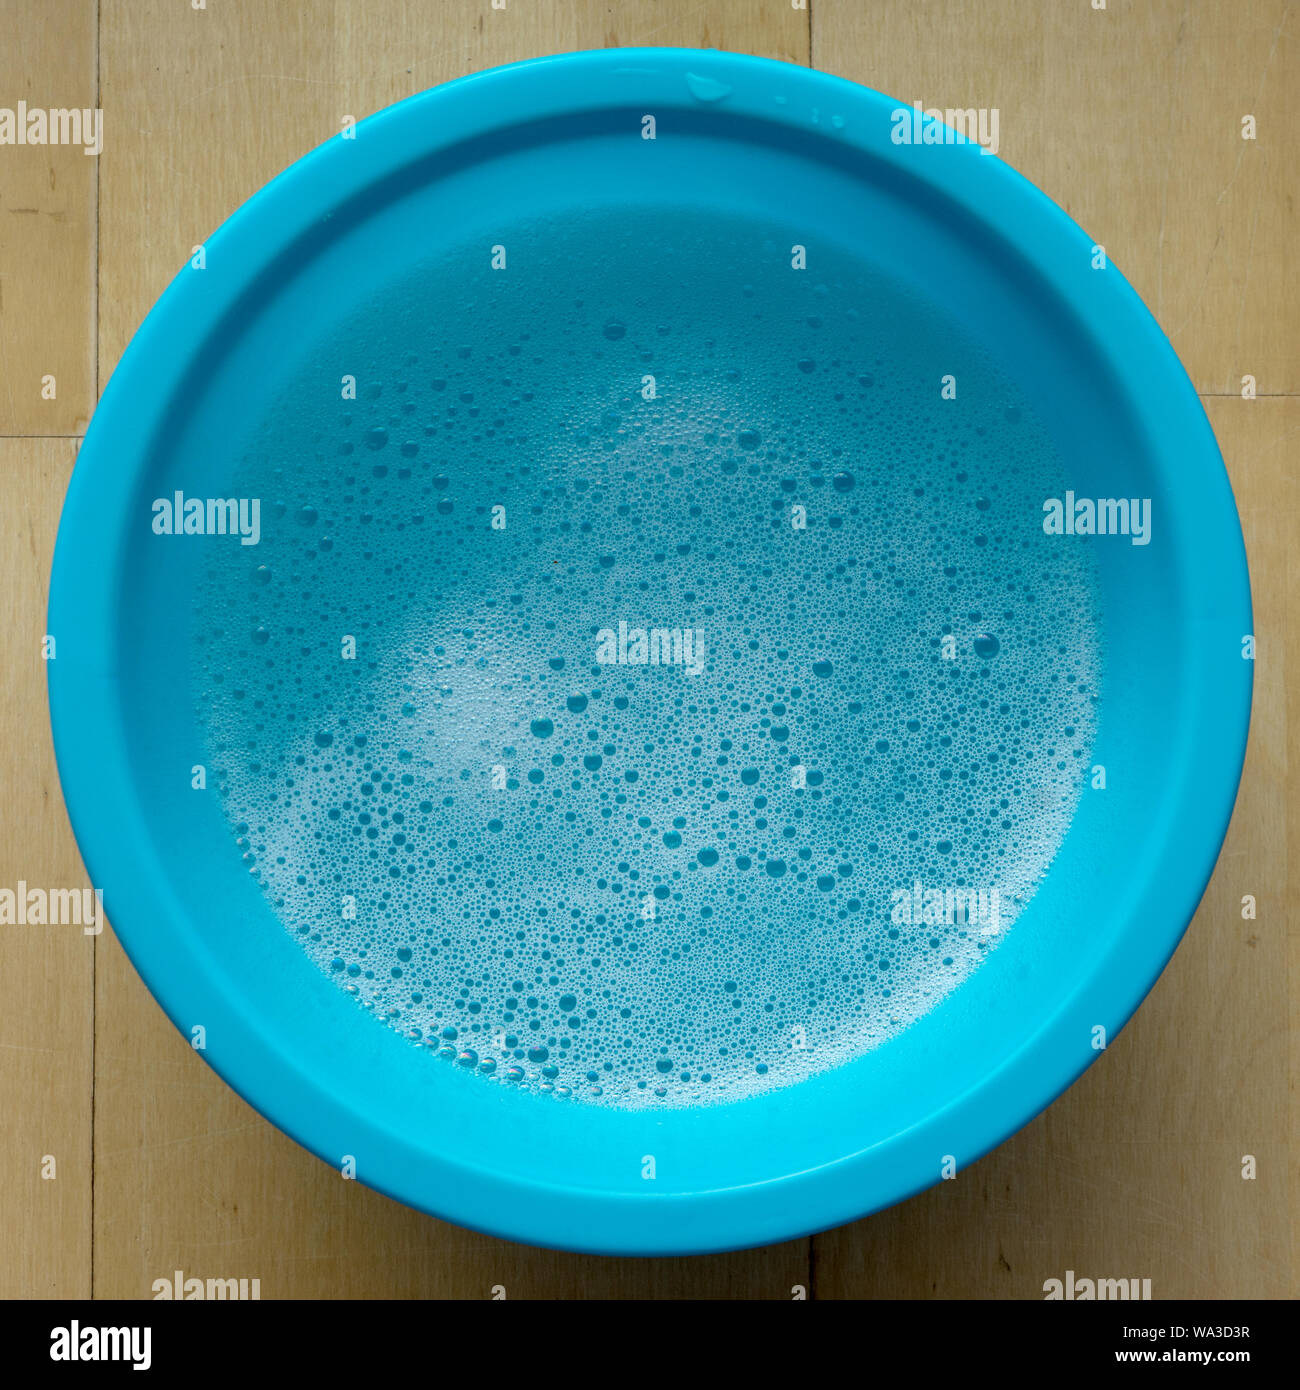 Blue bowl with soapy water and foam Stock Photo